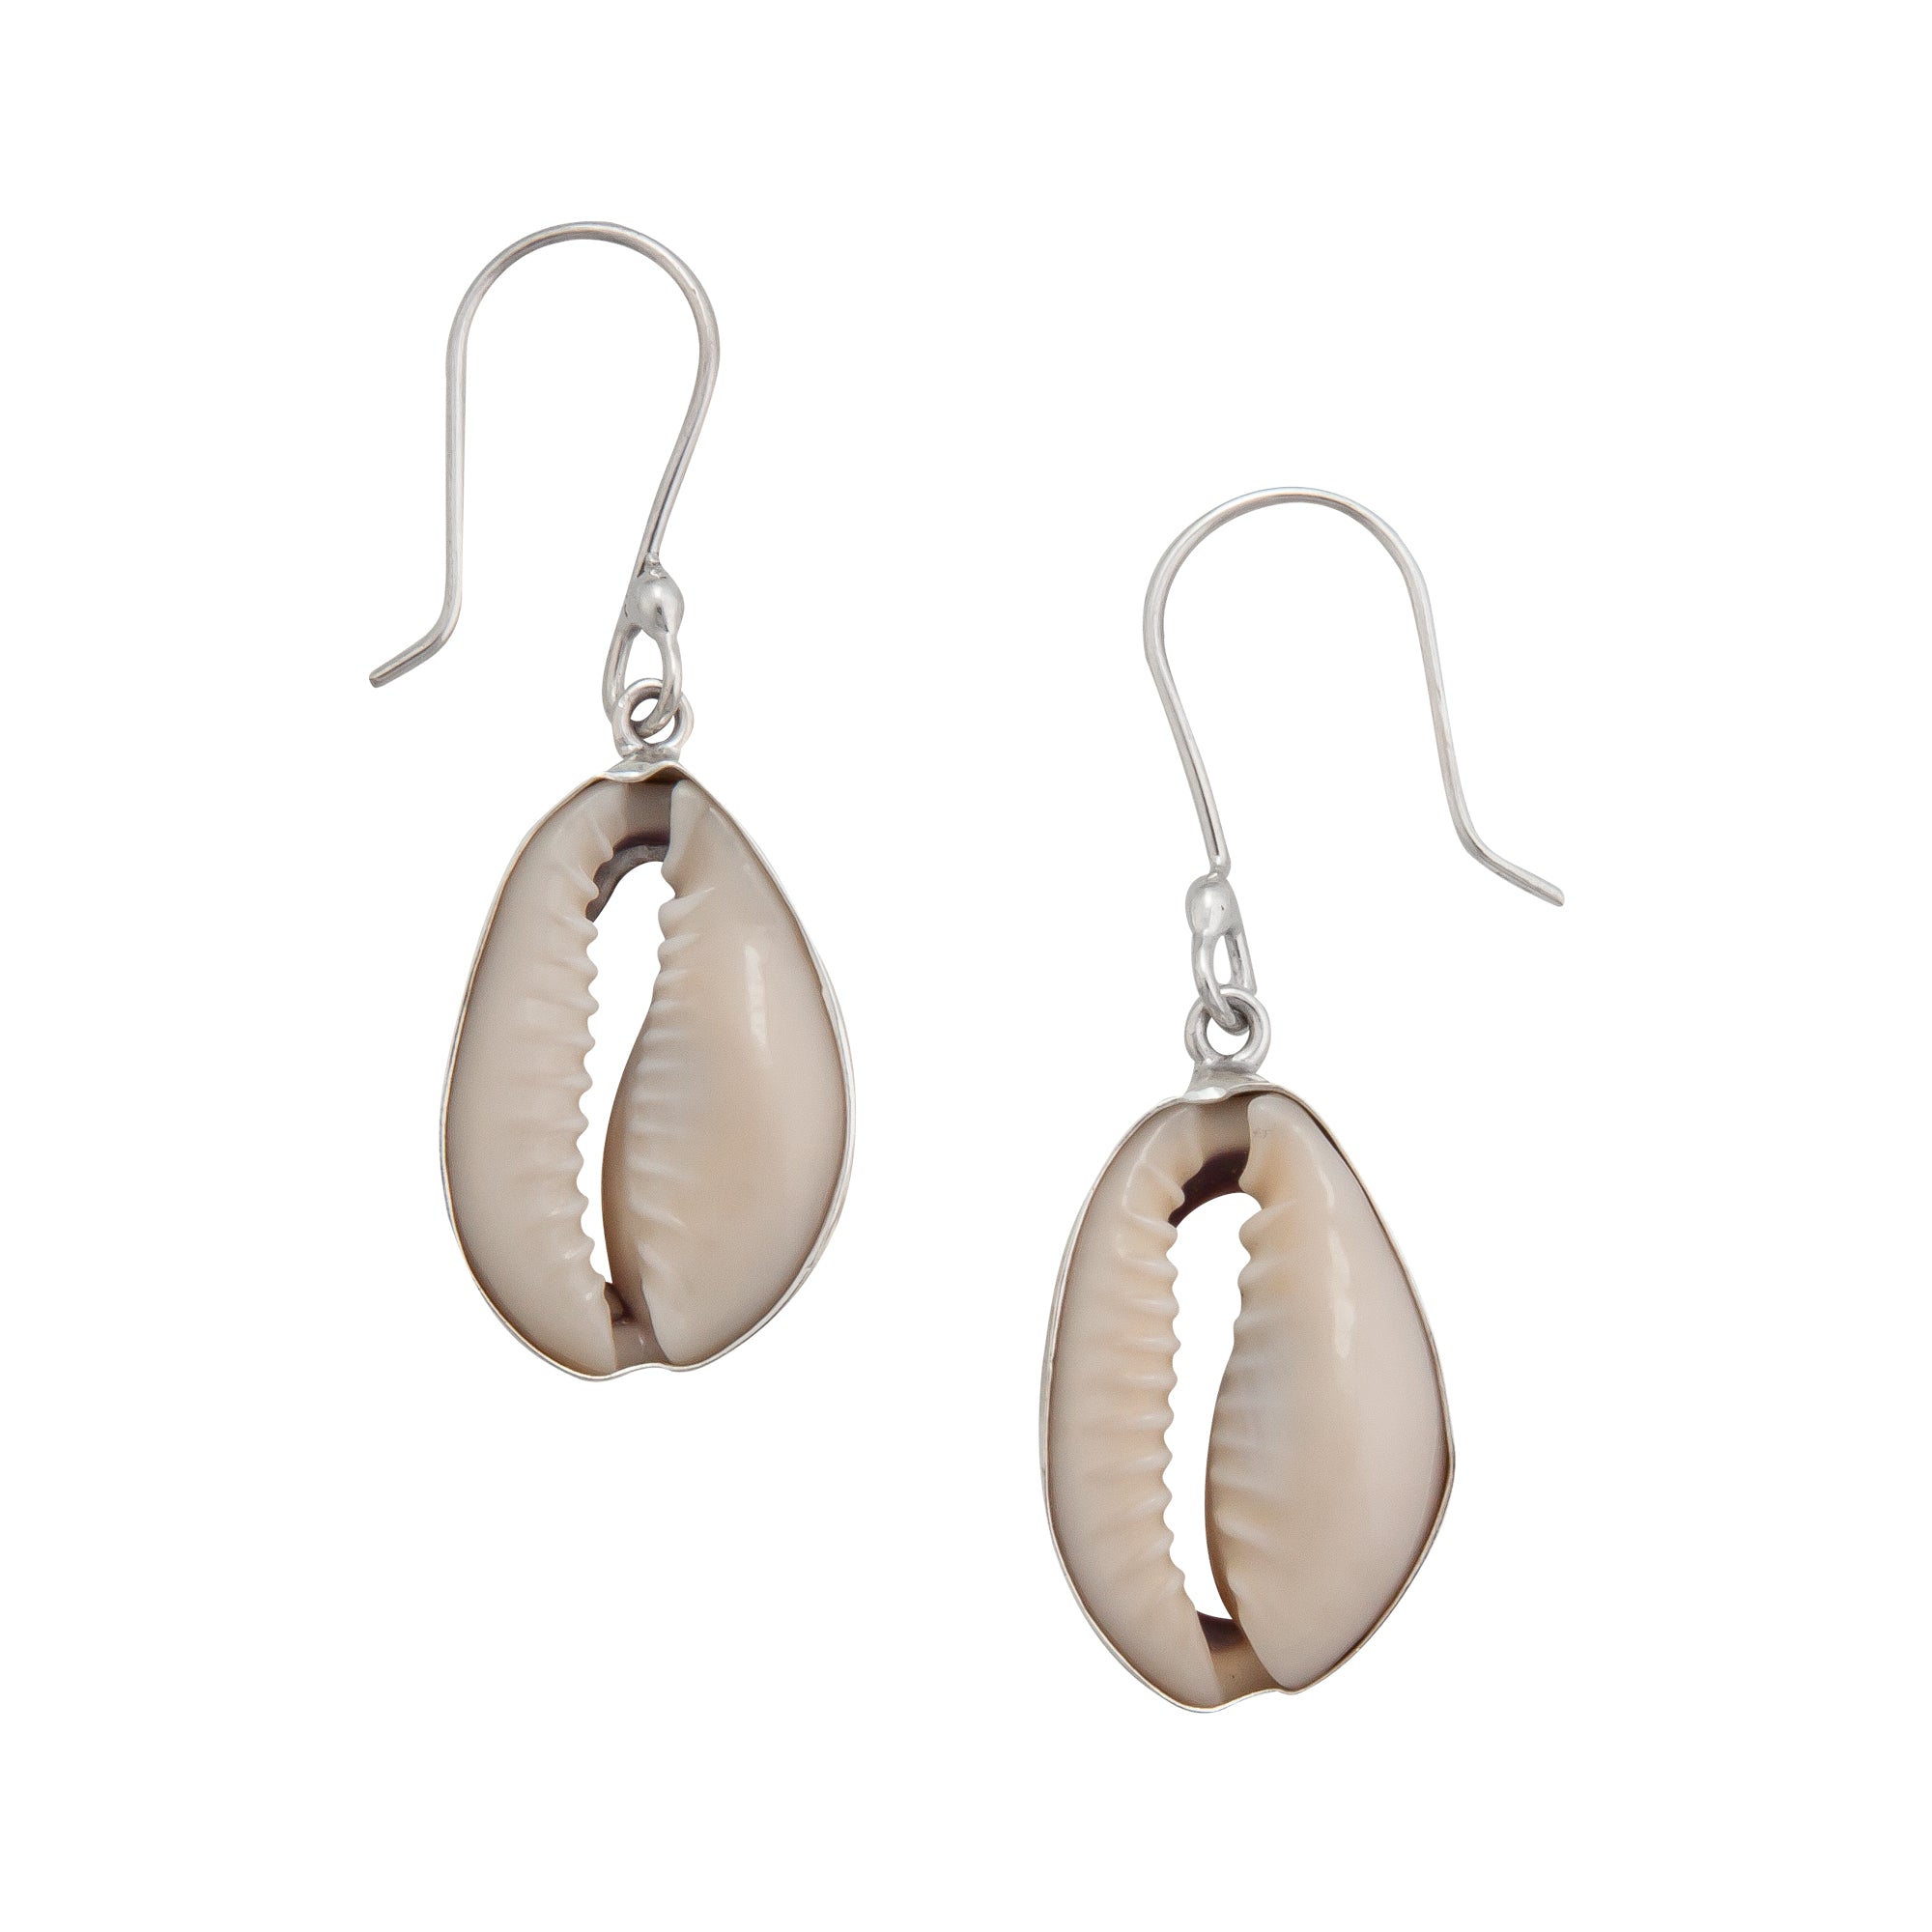 Sterling Silver Cowrie Shell Earrings | Charles Albert Jewelry